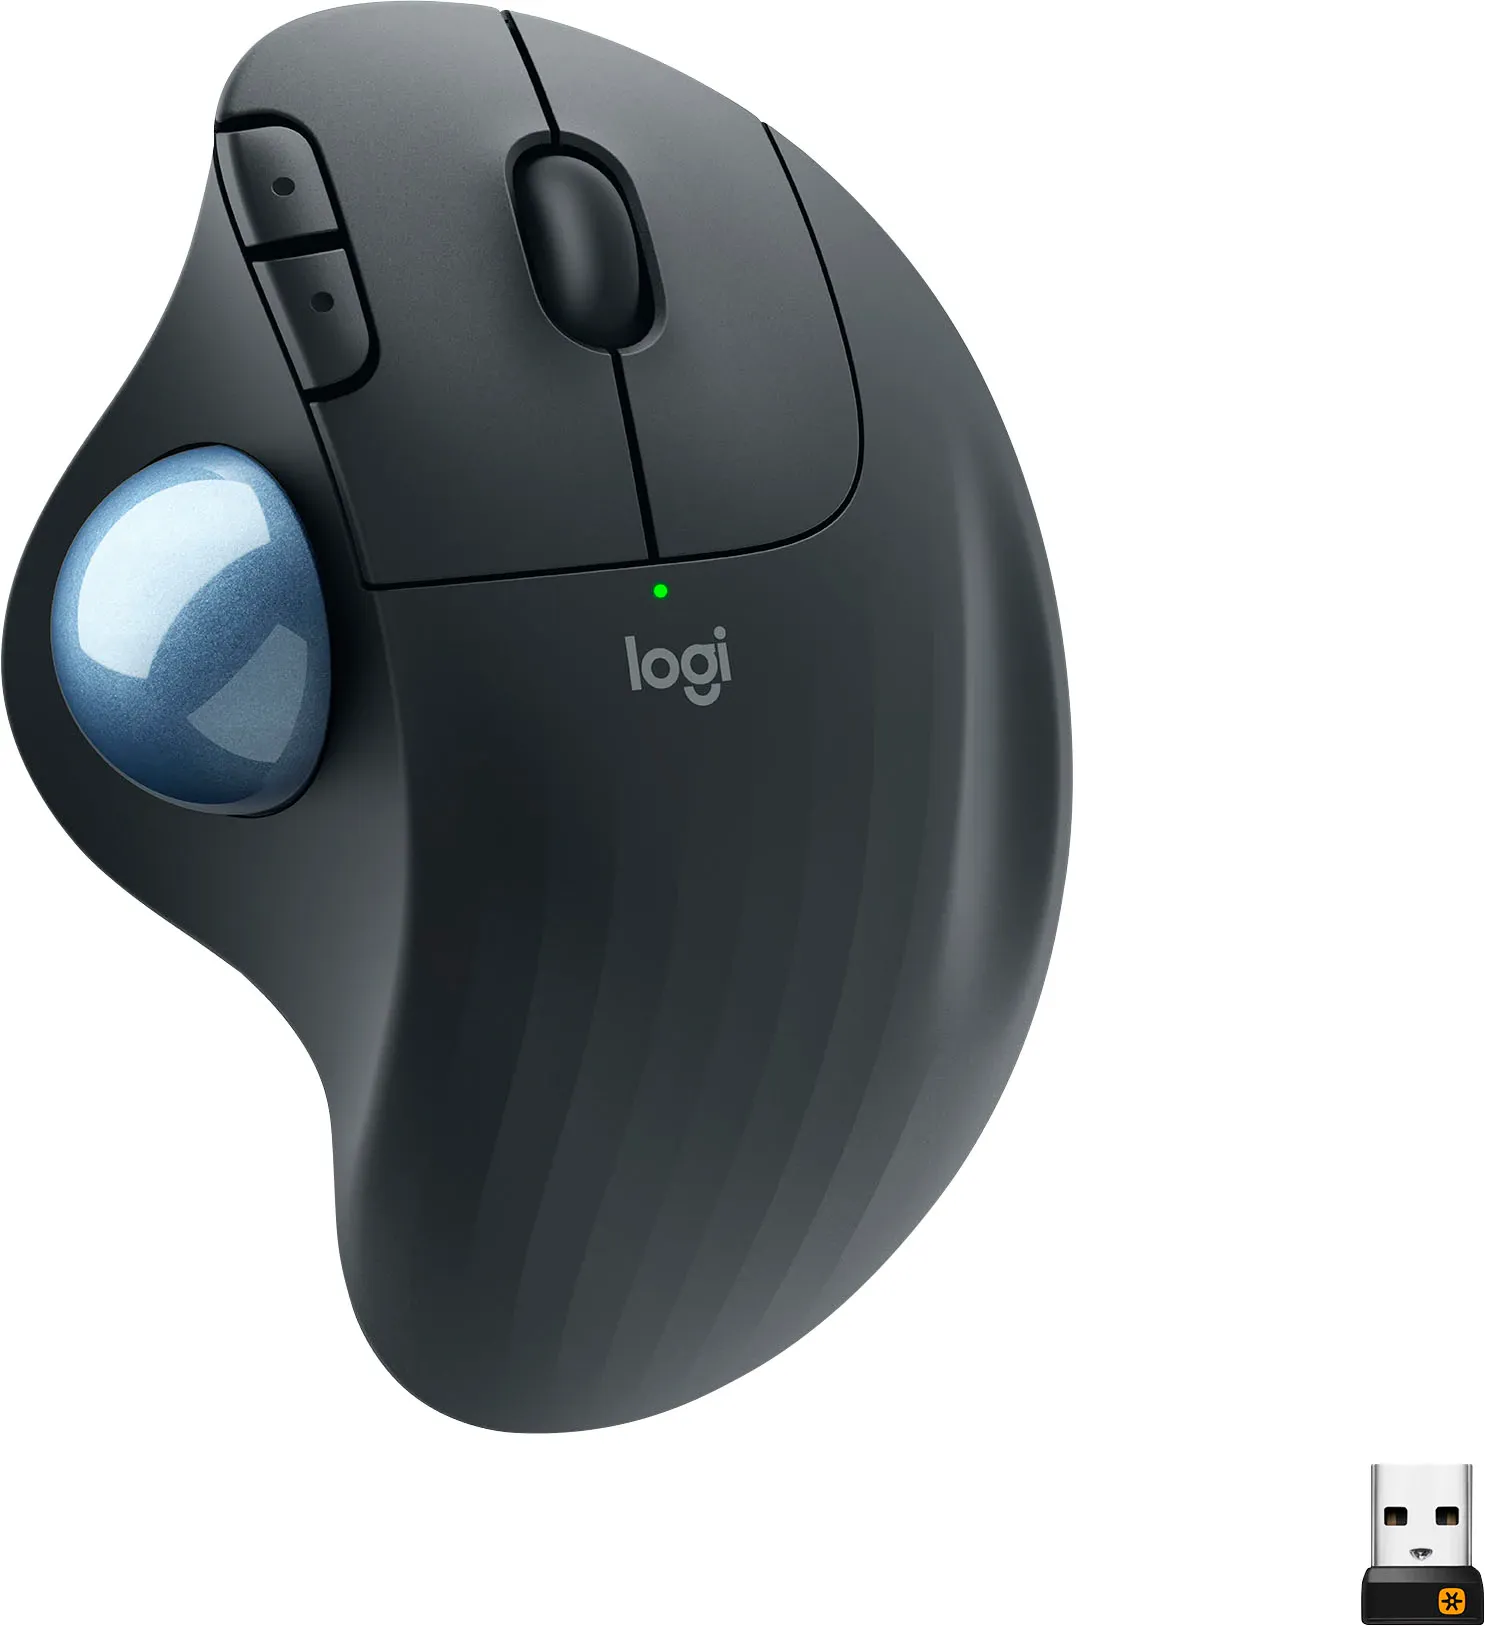 Logitech's M570 has a distinct and instantly recognizable form-factor. The giant teal trackball is easily spotted while the mouse is in use. If you do a lot of scrolling for work, and find a trackball comfortable, this is the best option by far. This is one of the most comfortable mice to use for long periods of time.